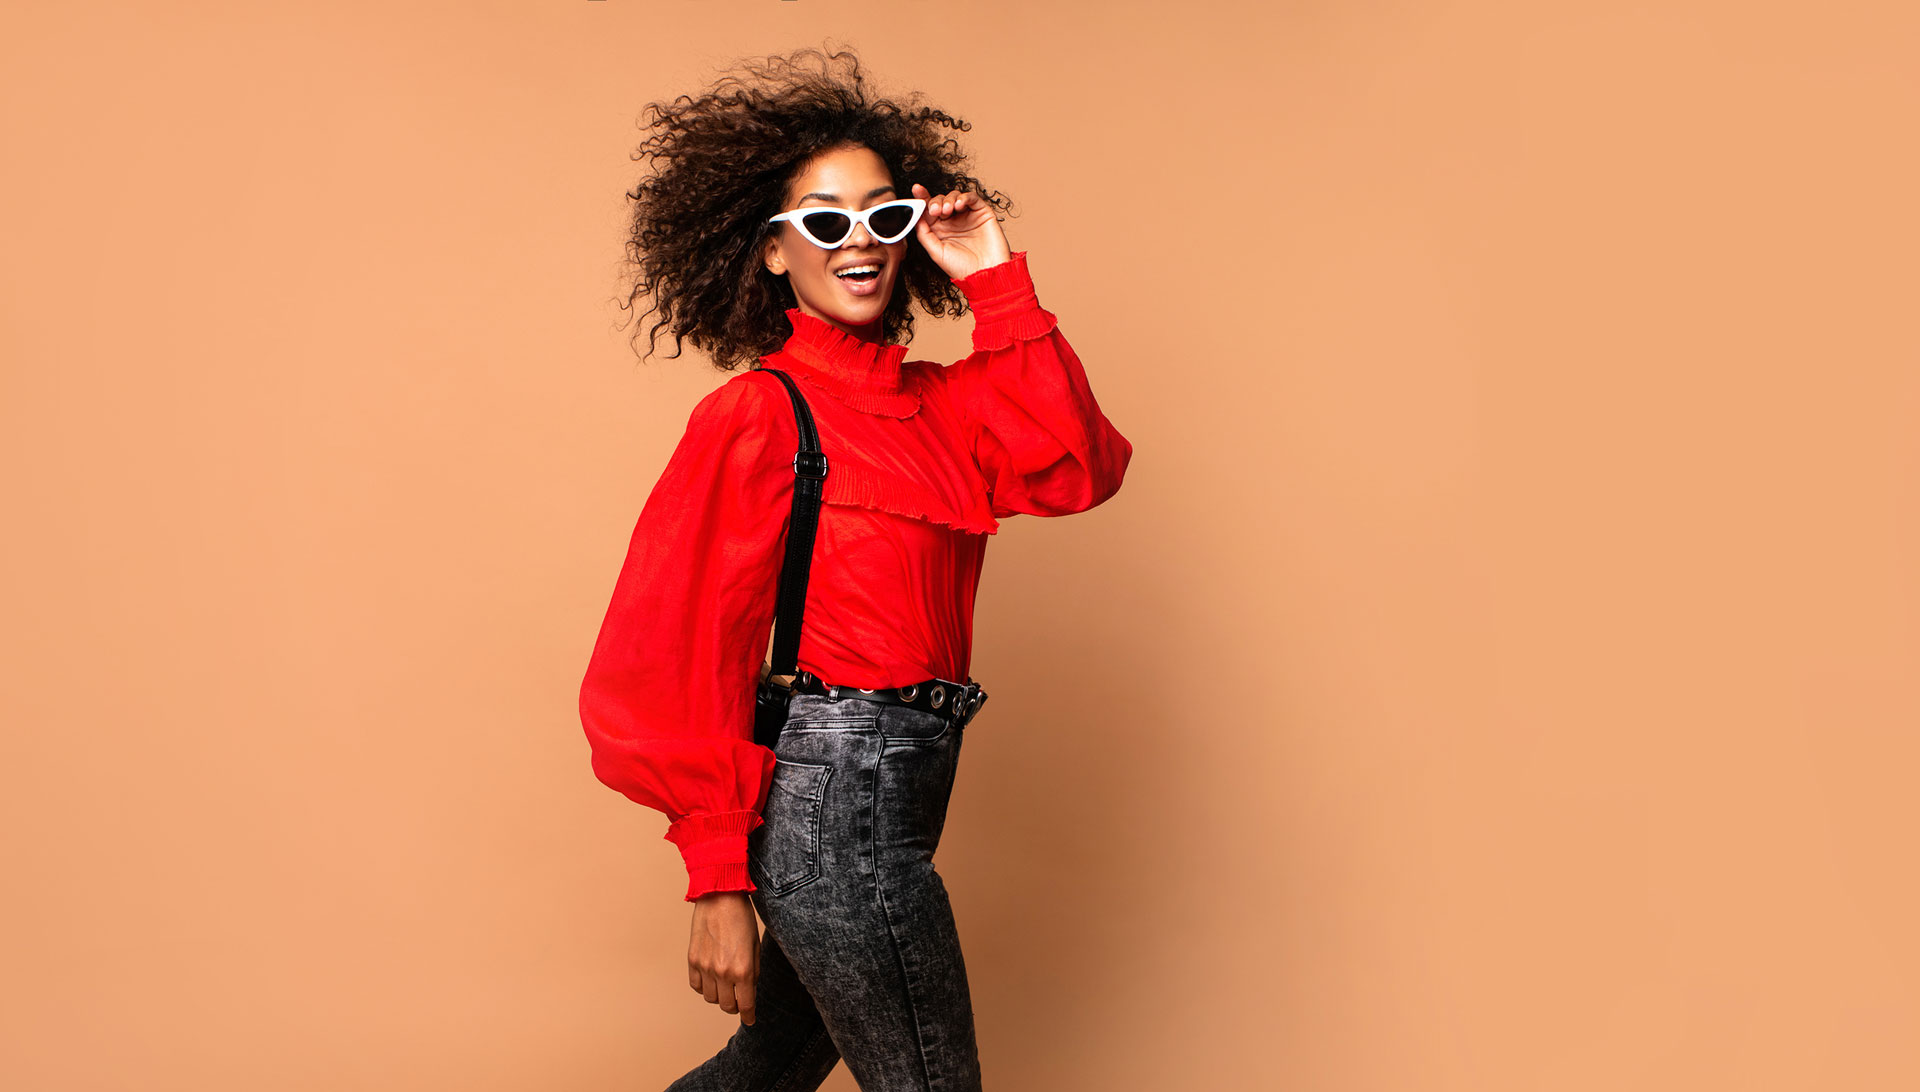 Financially confident young woman in red top and jeans putting on her sunglasses.